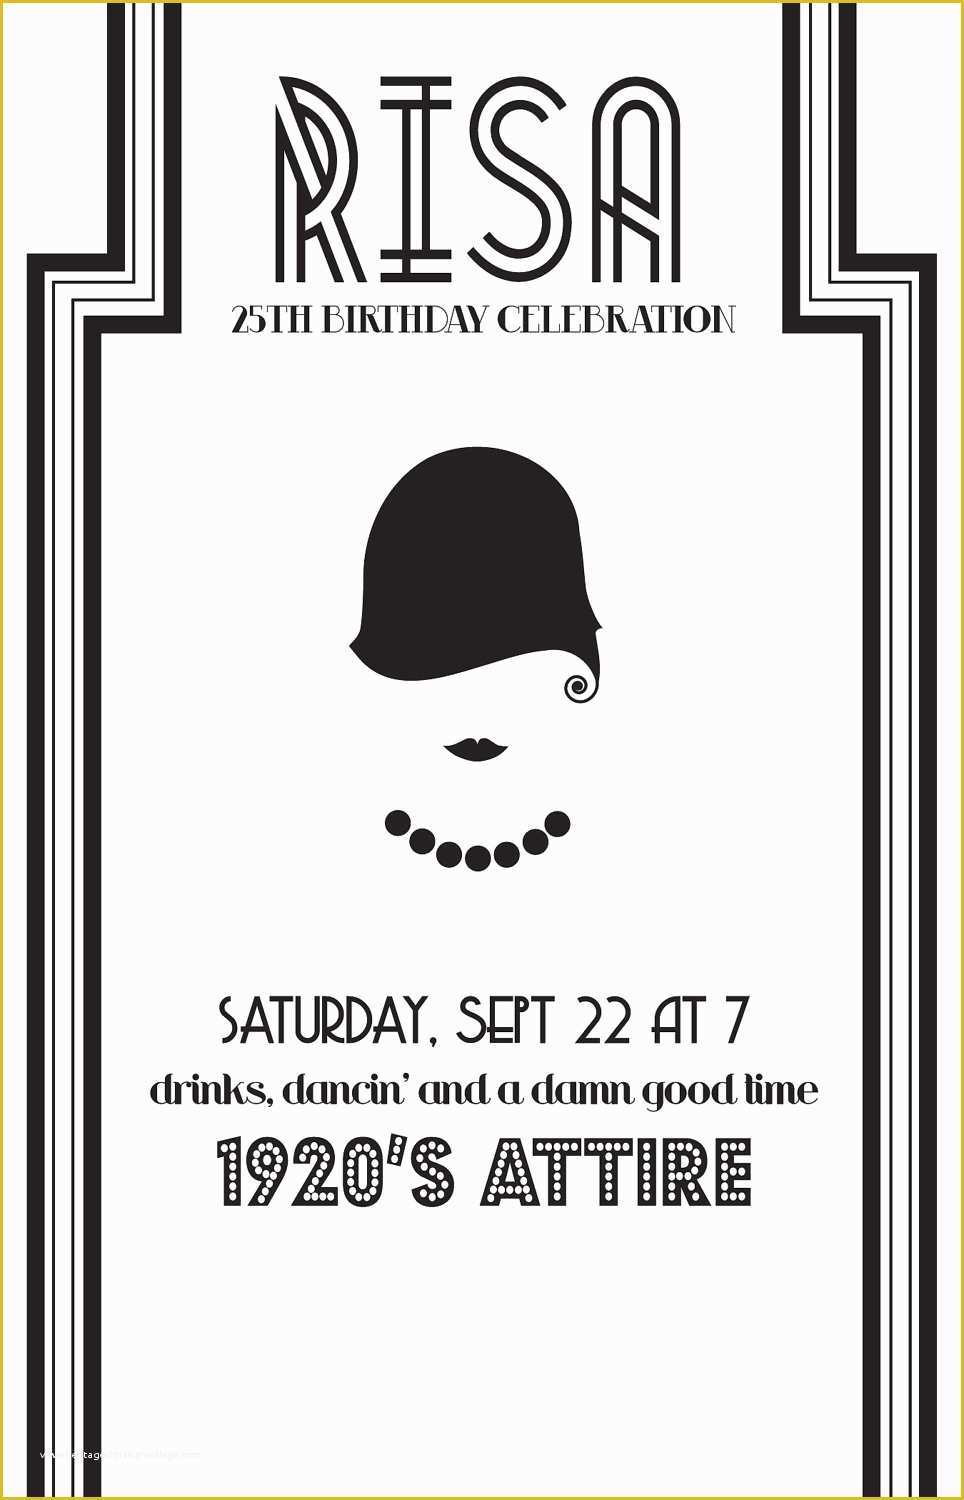 1920s Party Invitation Template Free Of 1920s Party Invite